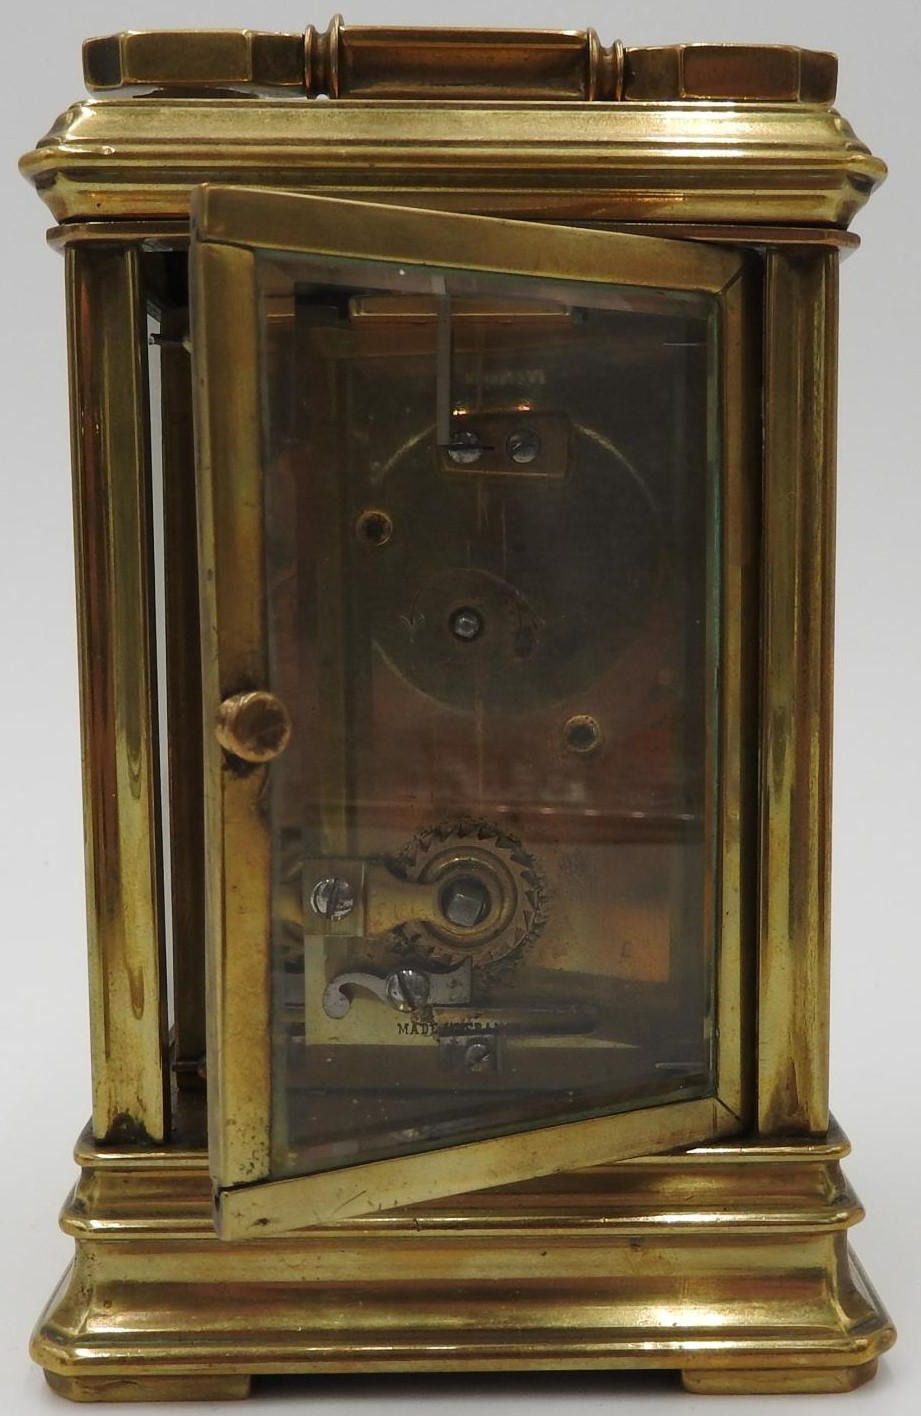 A FRENCH BRASS CASED CARRIAGE CLOCK, 12 x 8 x 7.5cm - Image 3 of 3